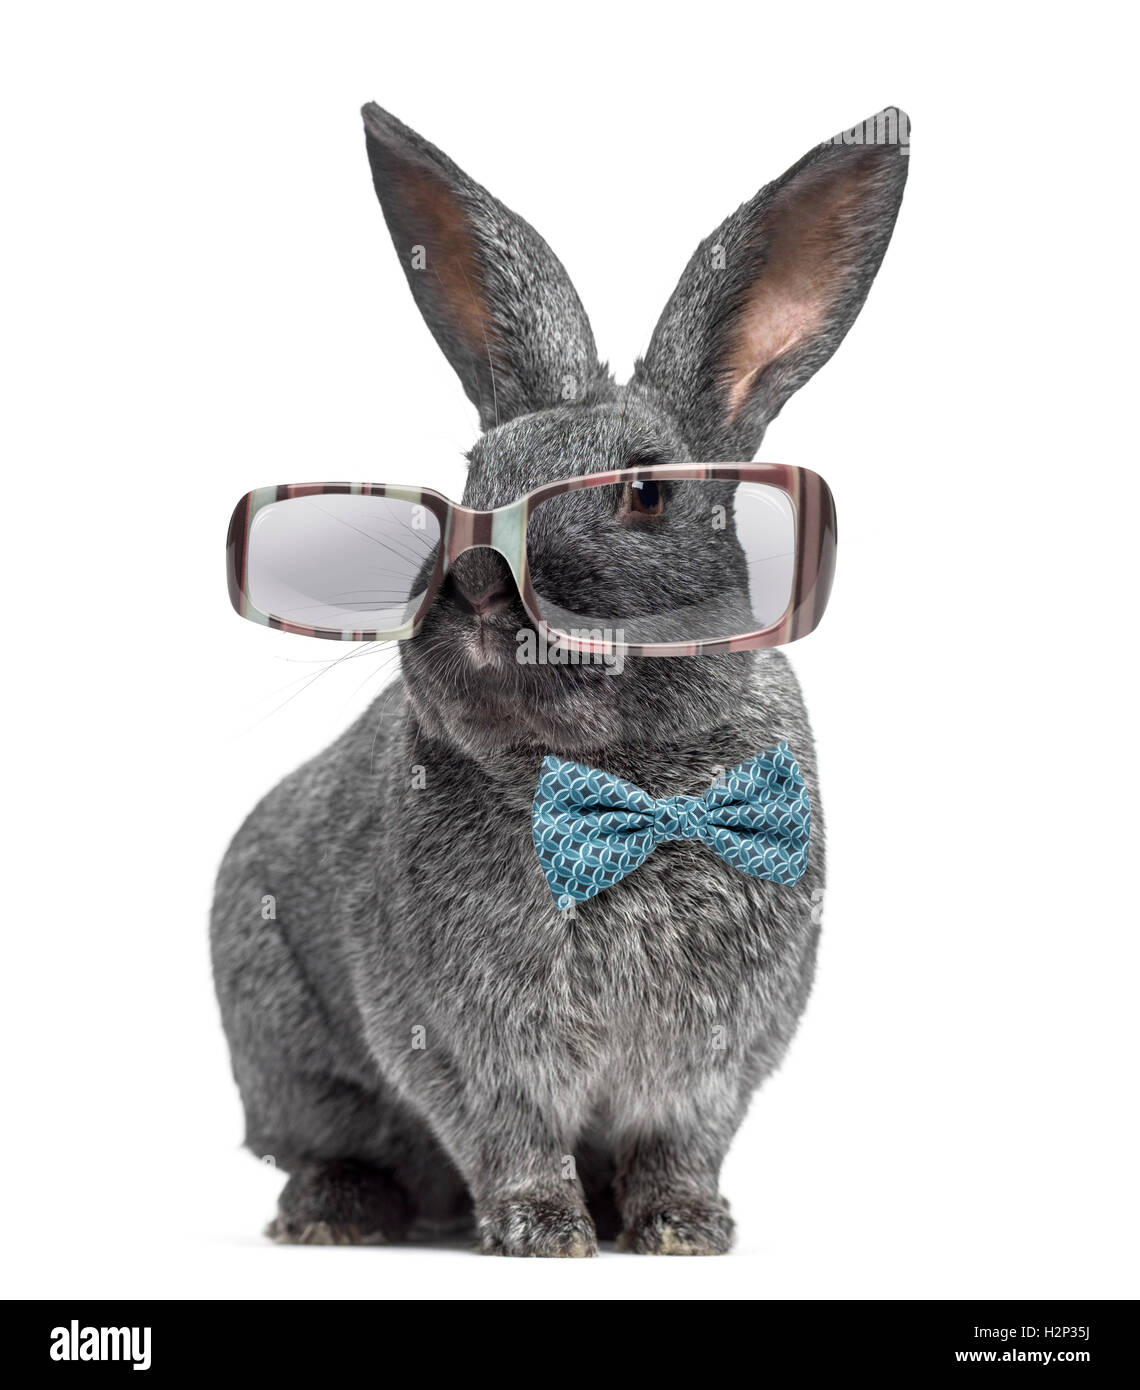 Funny Argente rabbit wearing glasses and bow tie isolated on white Stock Photo